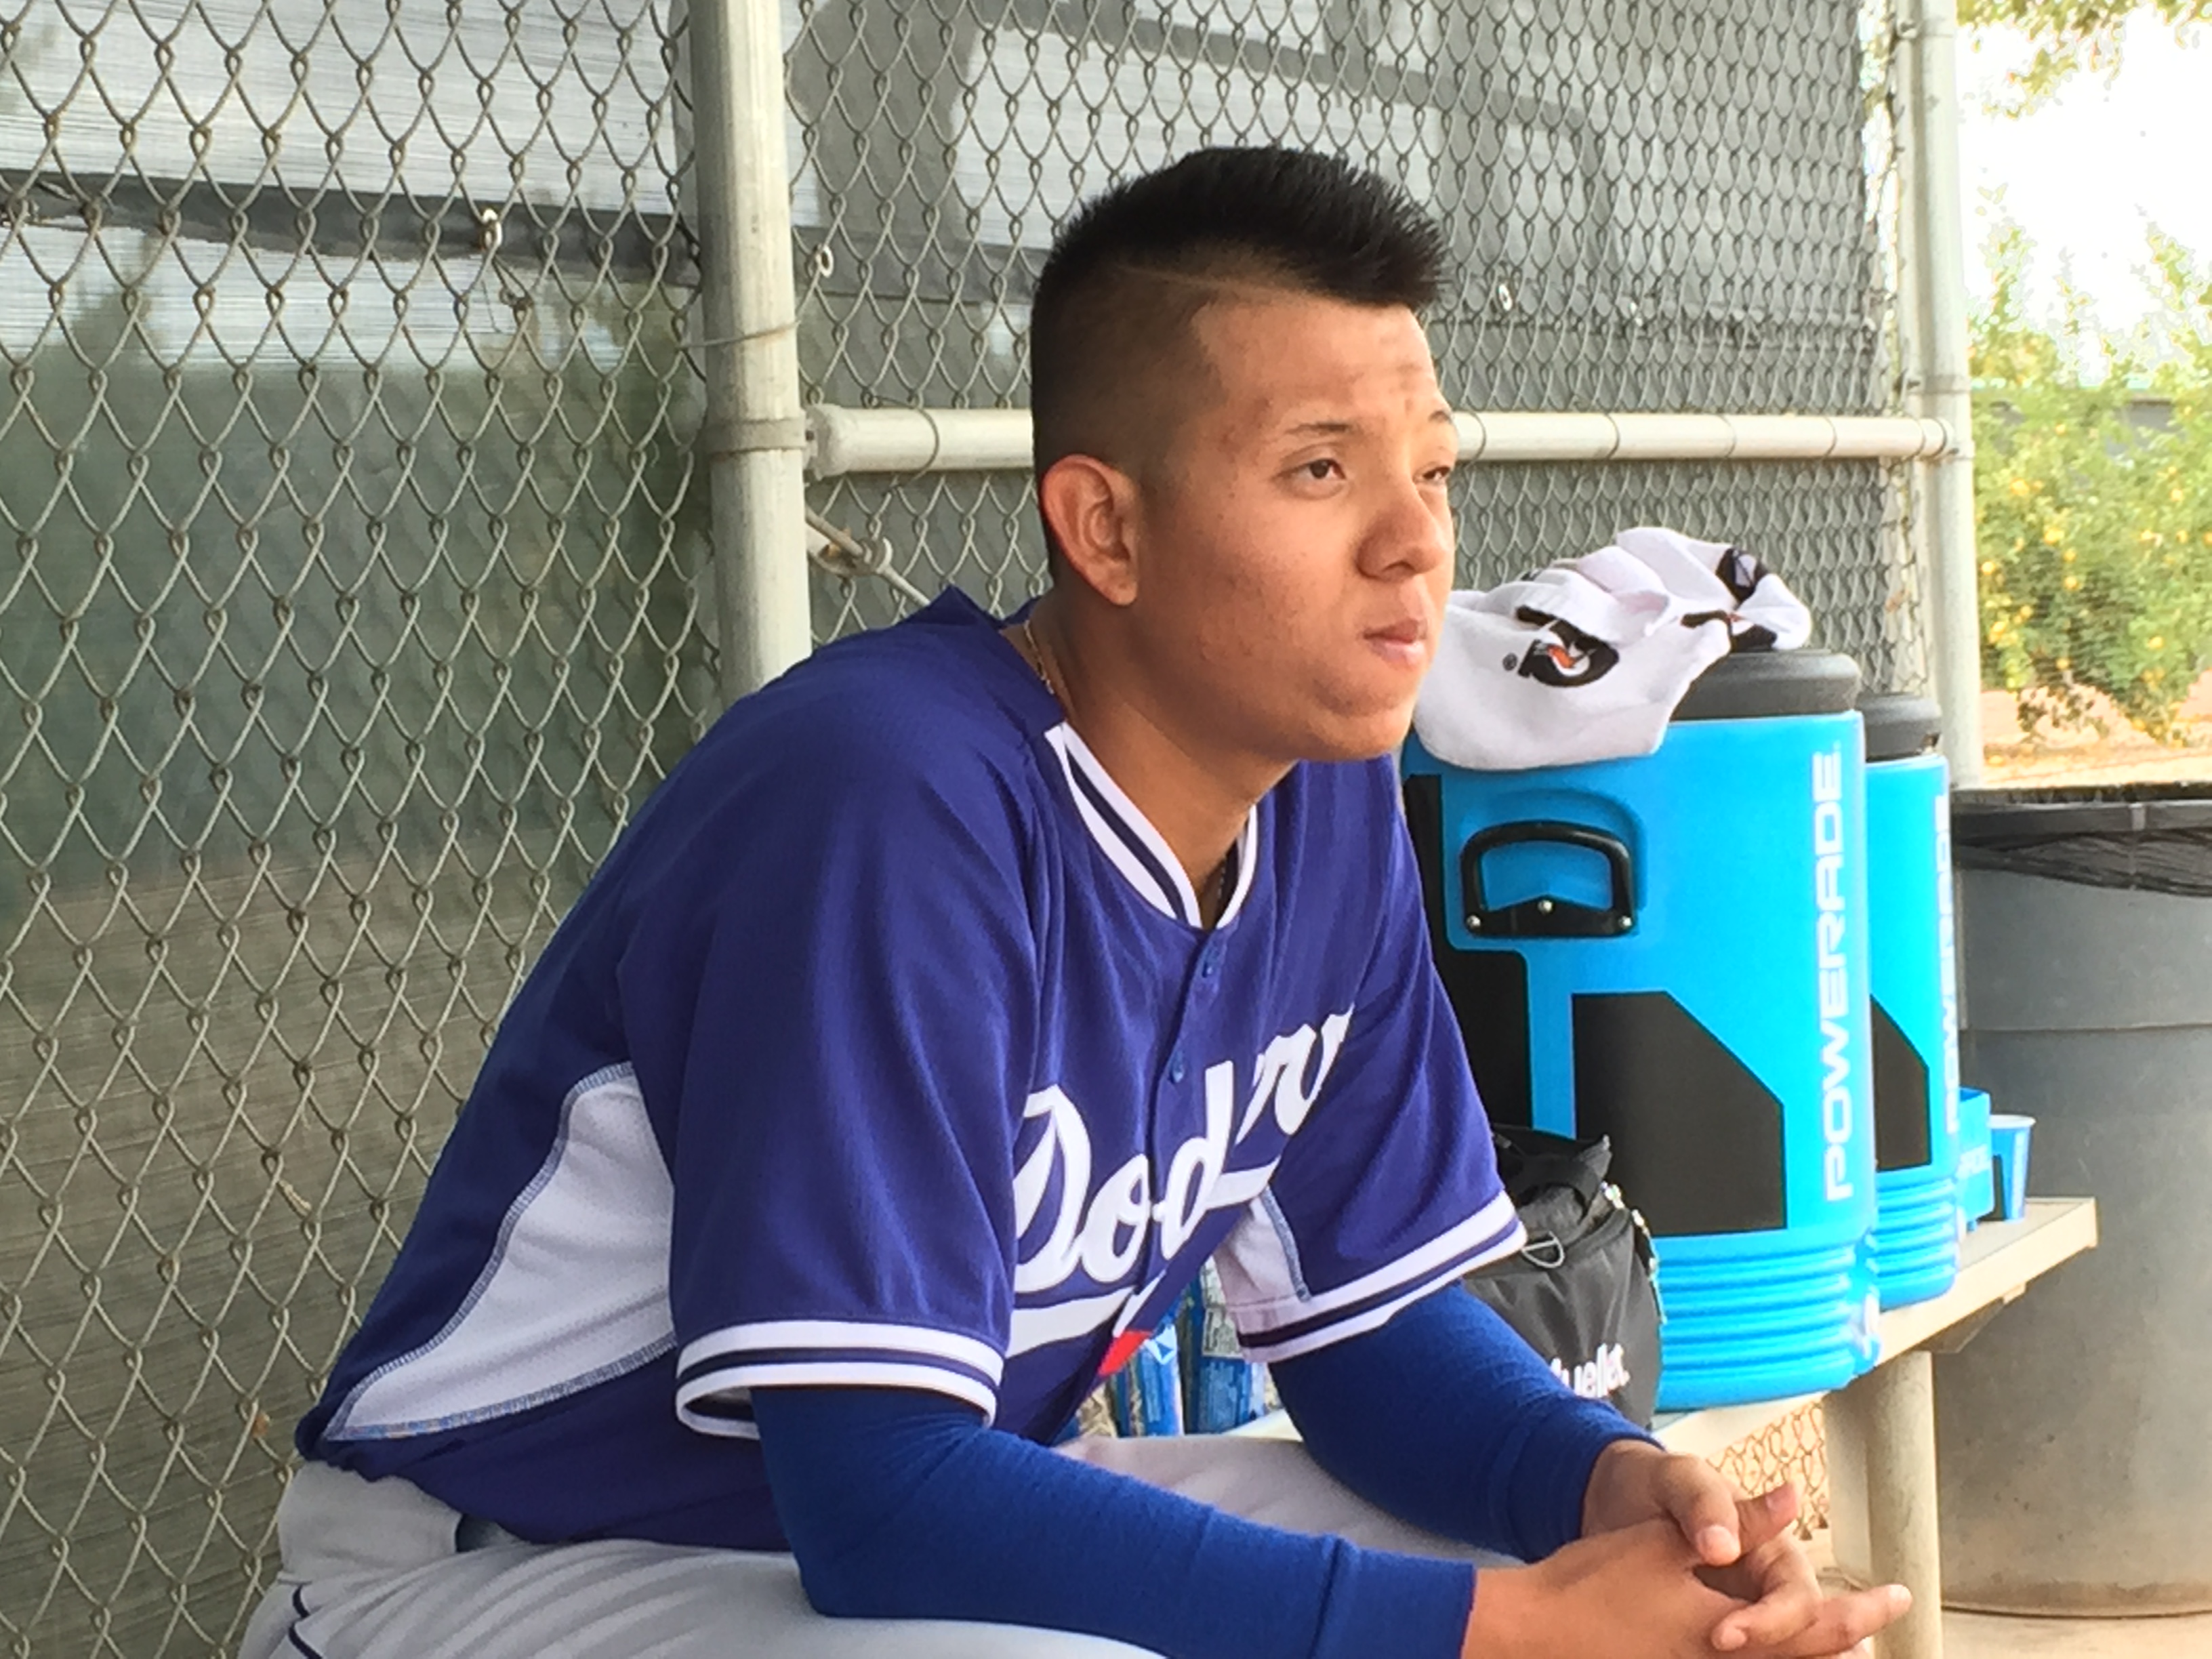 In case you missed it: Would Julio Urias pitch in WBC?, by Jon Weisman